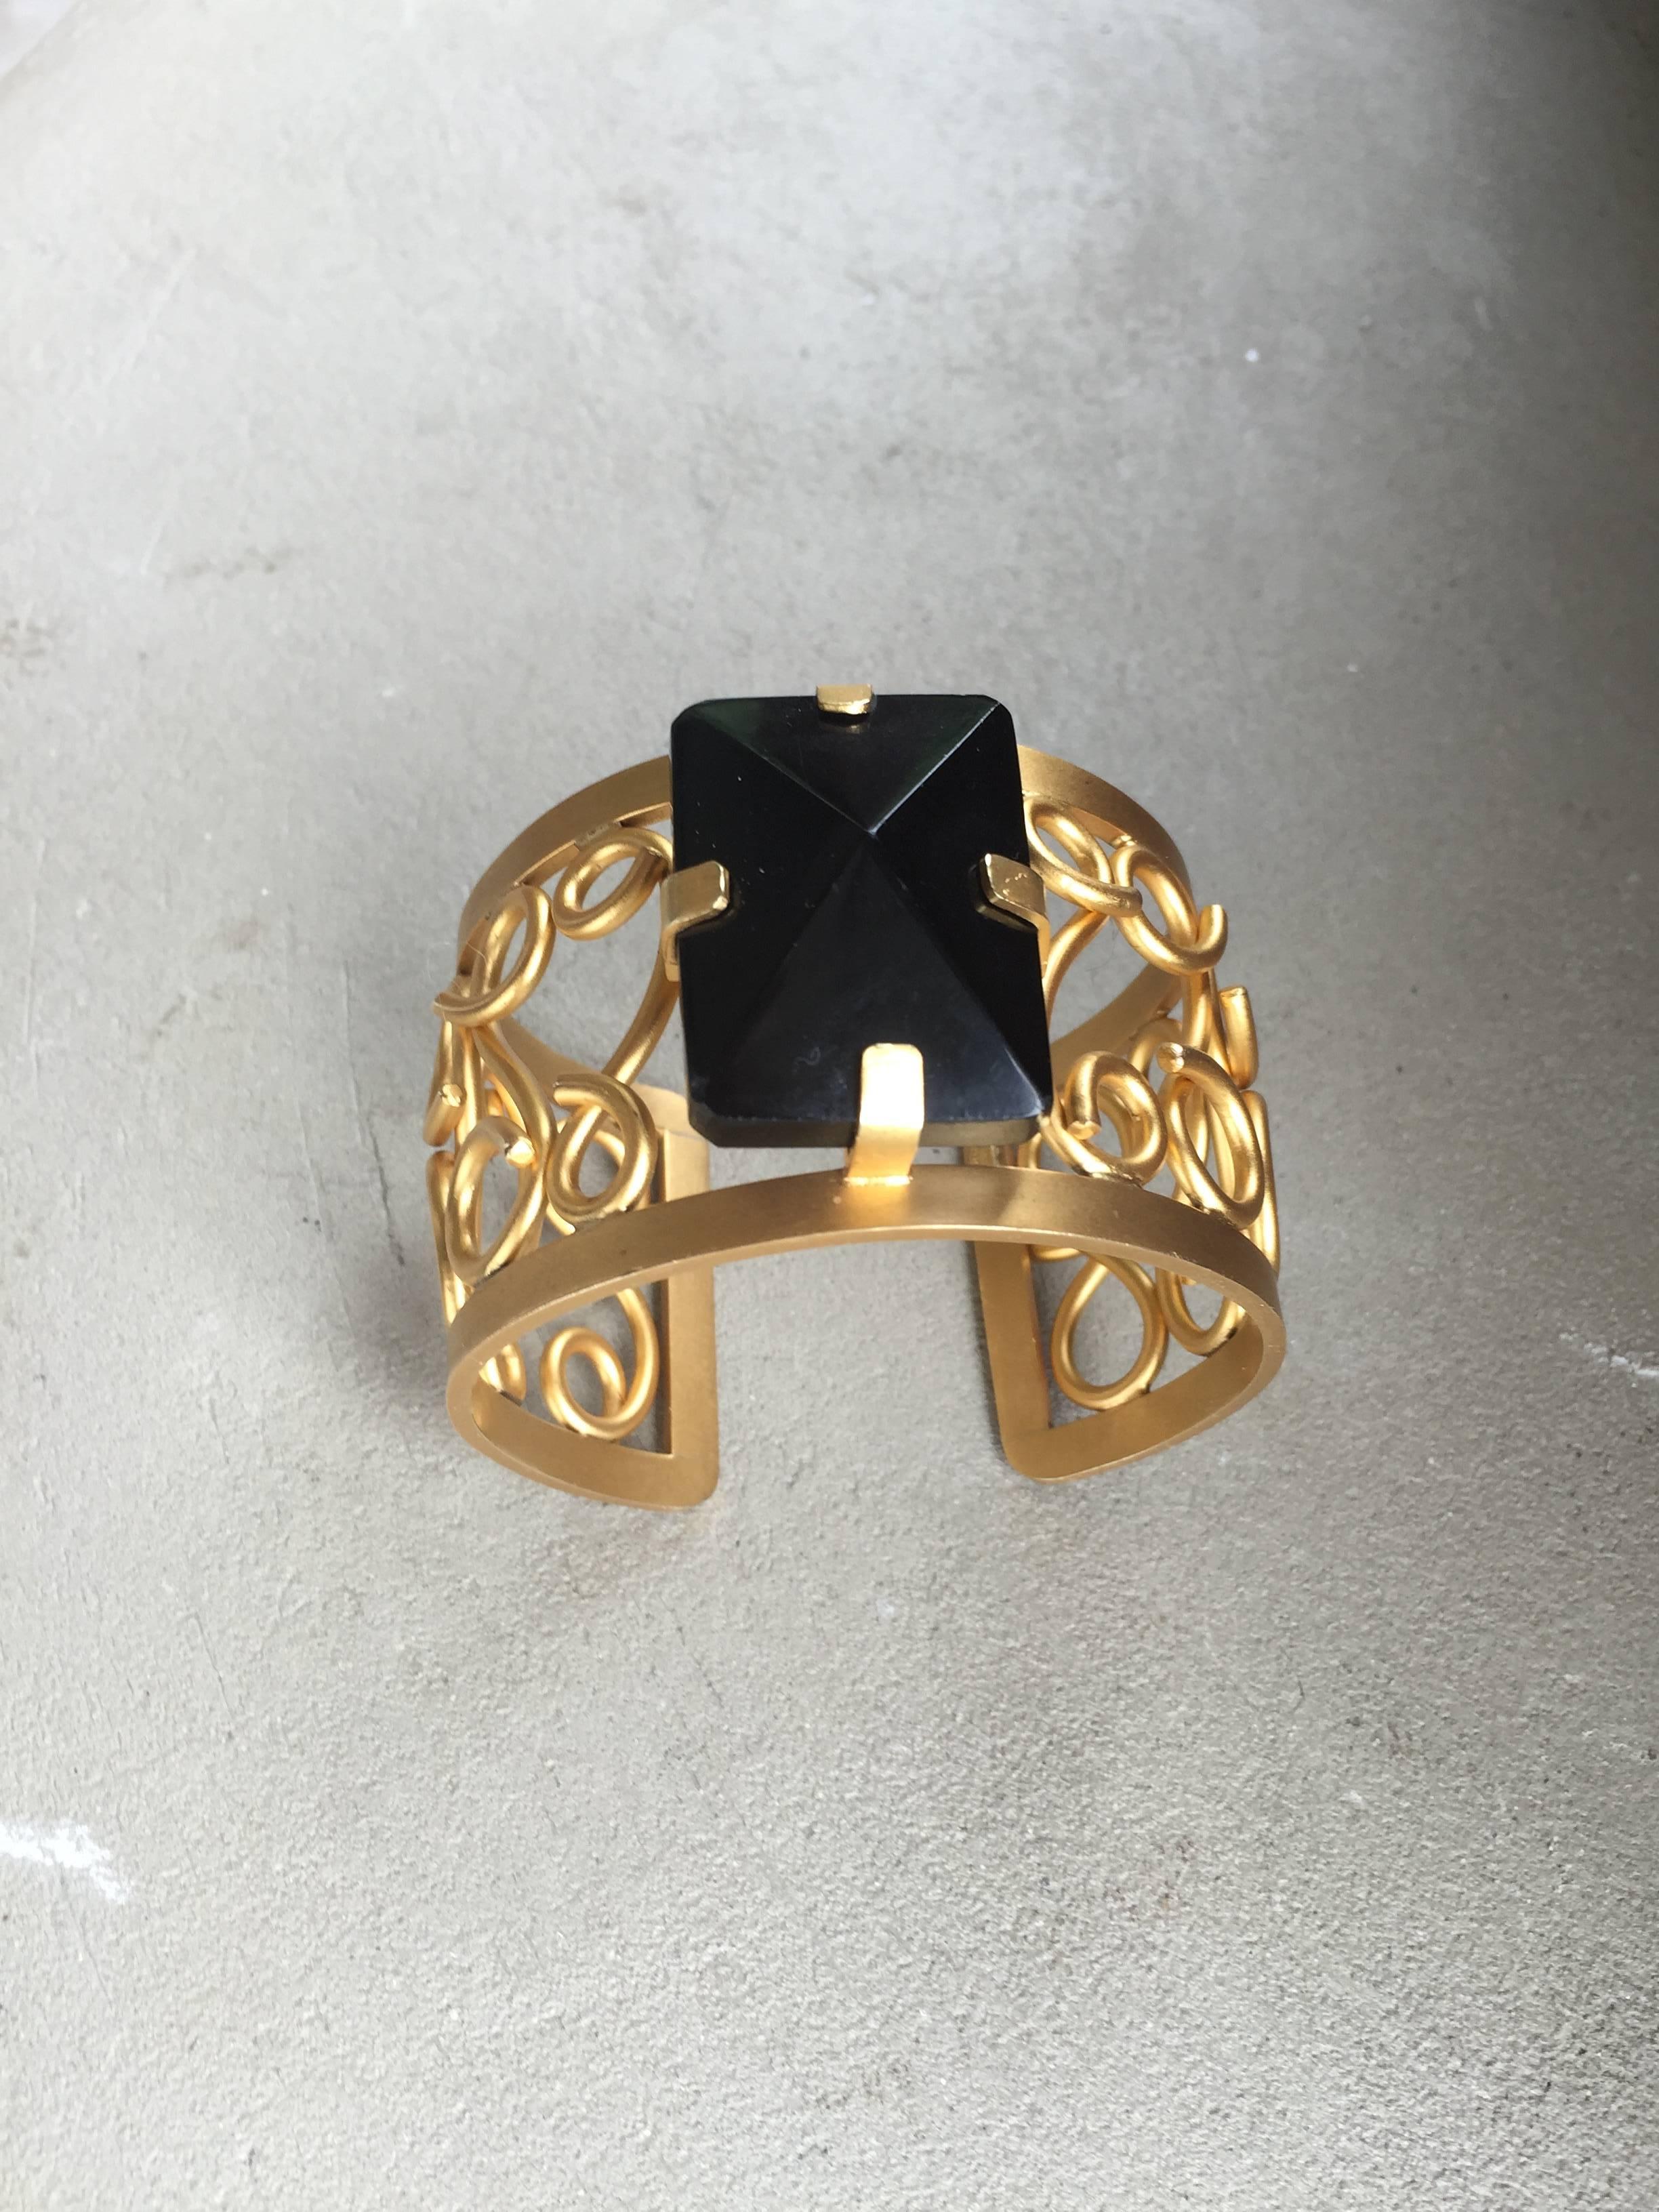 Really nice vintage Nina Ricci gold plated cuff with stone in the center.

Good condition but as it is a vintage piece it can present some small signs of wear

Signed in the back